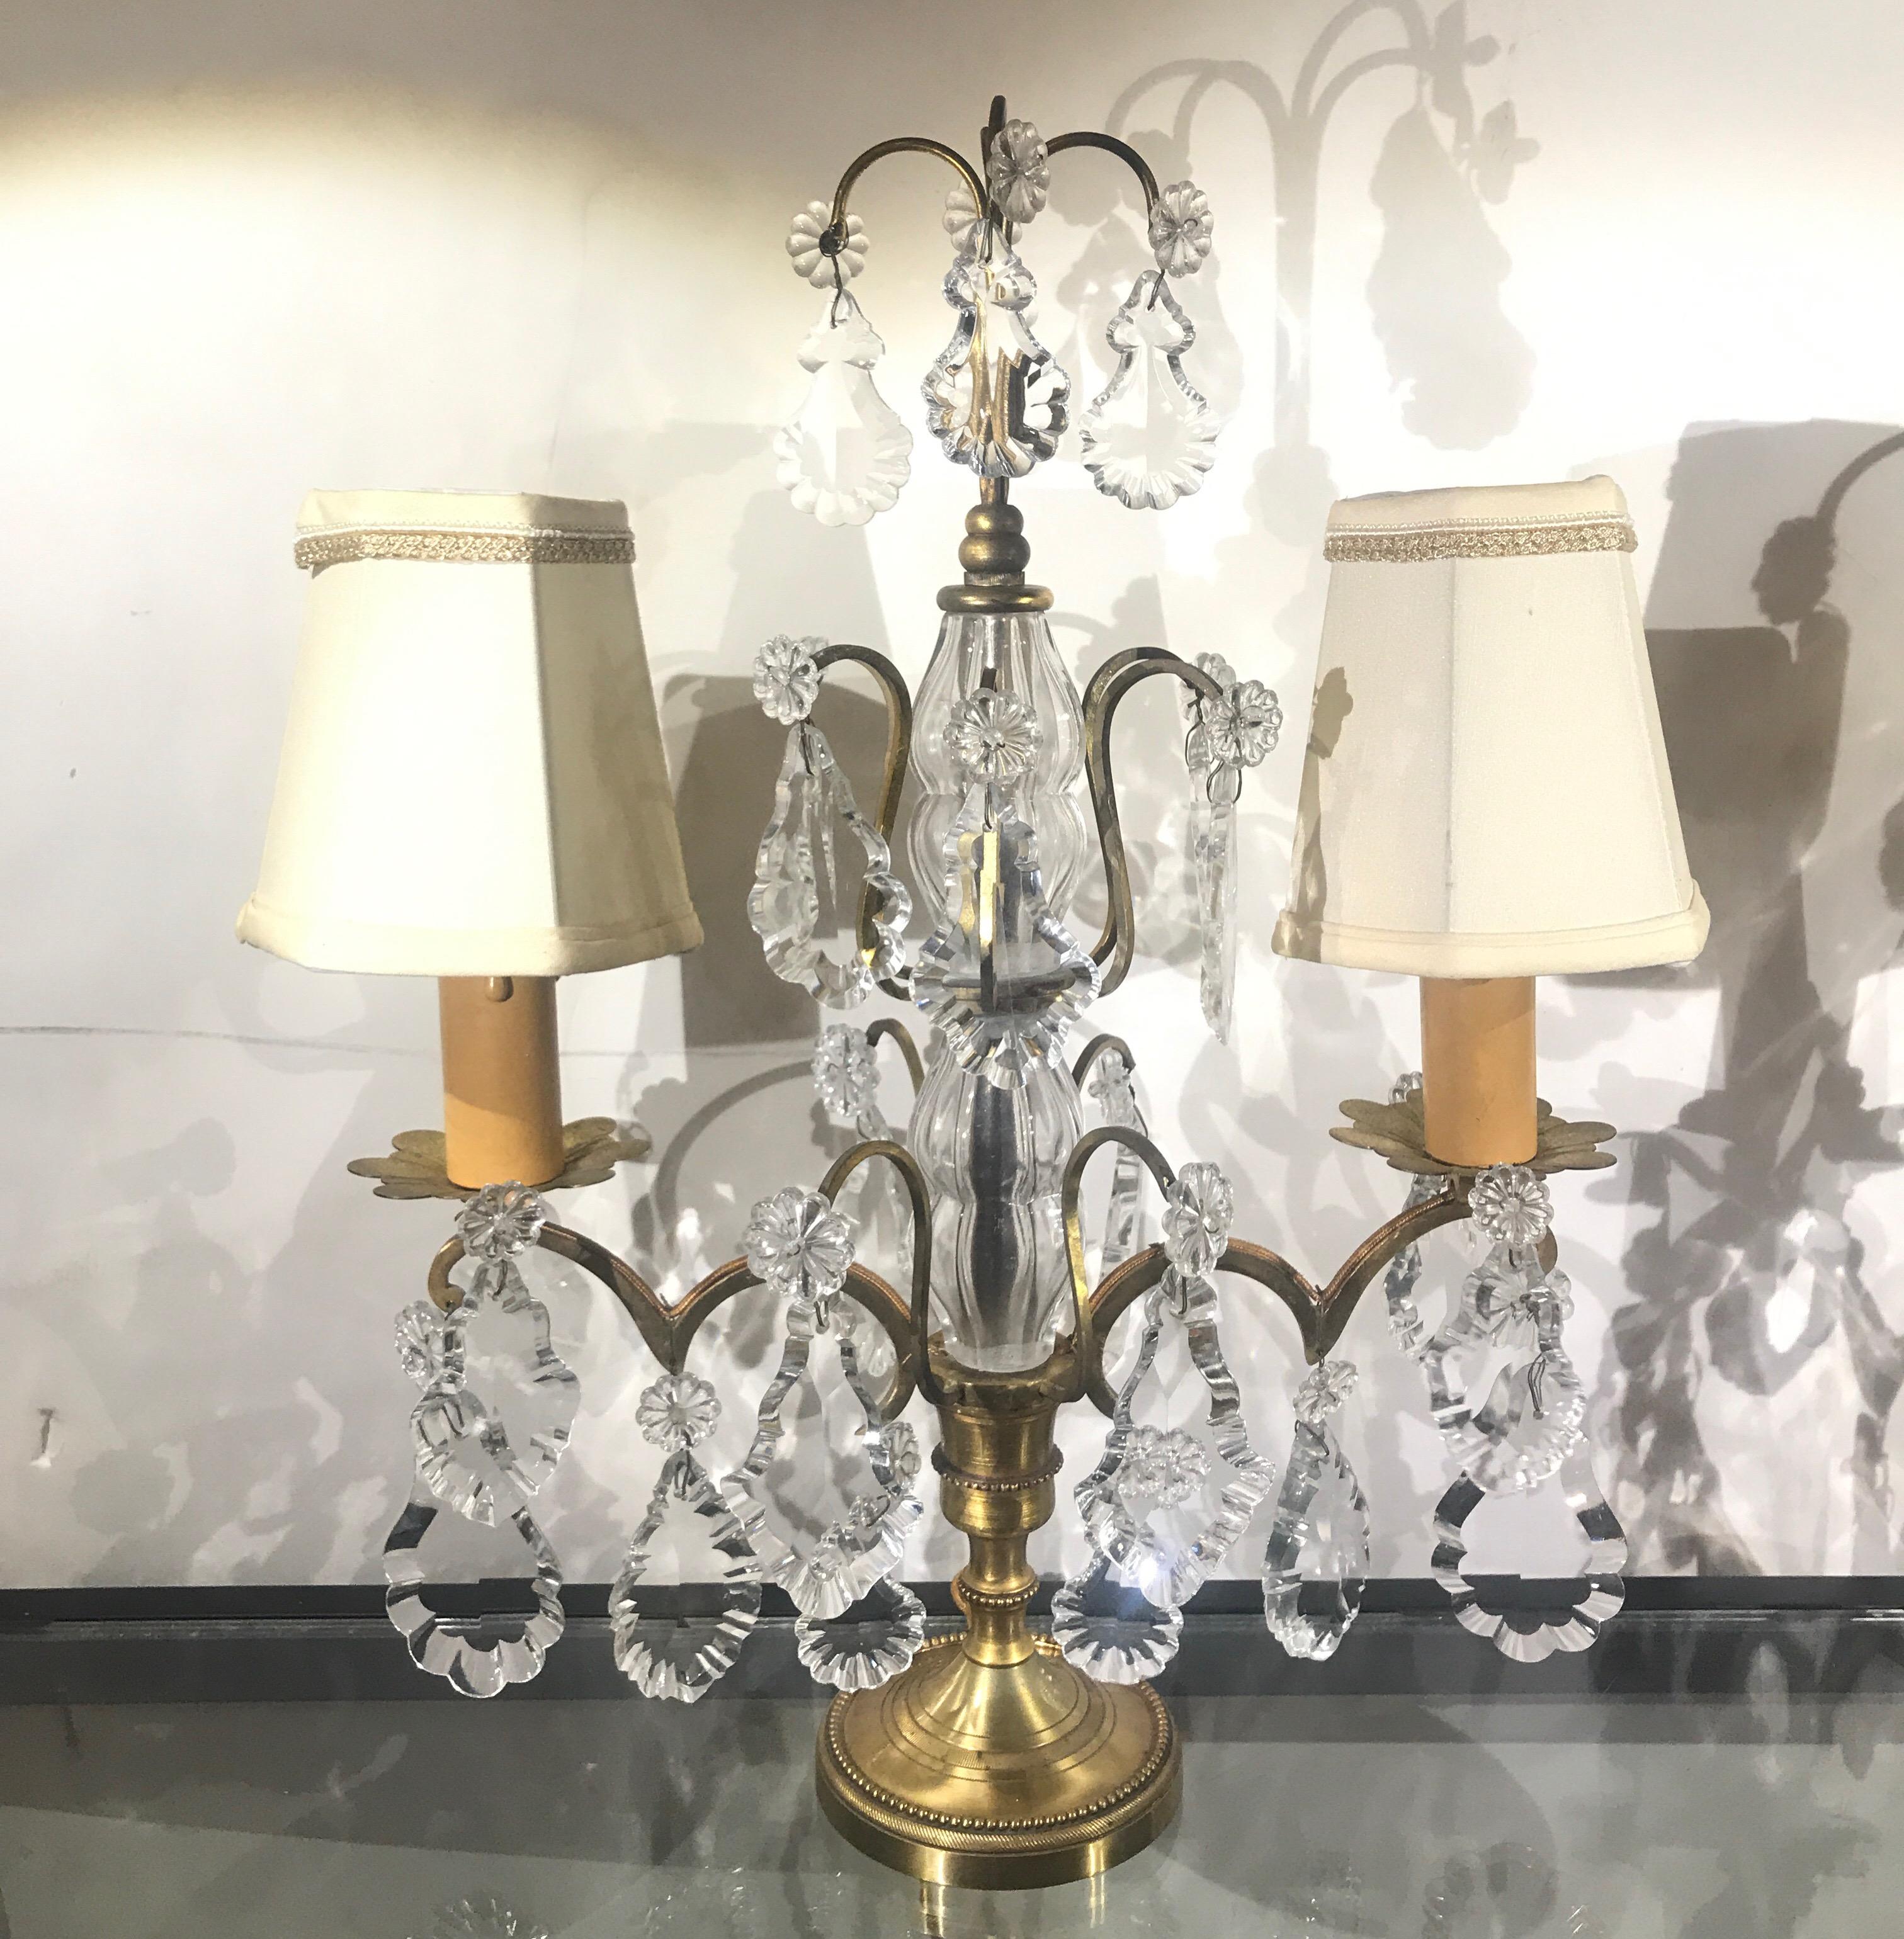 A pair of French bronze and crystal candelabra lamps with custom silk shades. The lamps with two arms with a showering of crystals from the top on the arms and on the candle cups. These are European wired and have end adapters for American plugs,